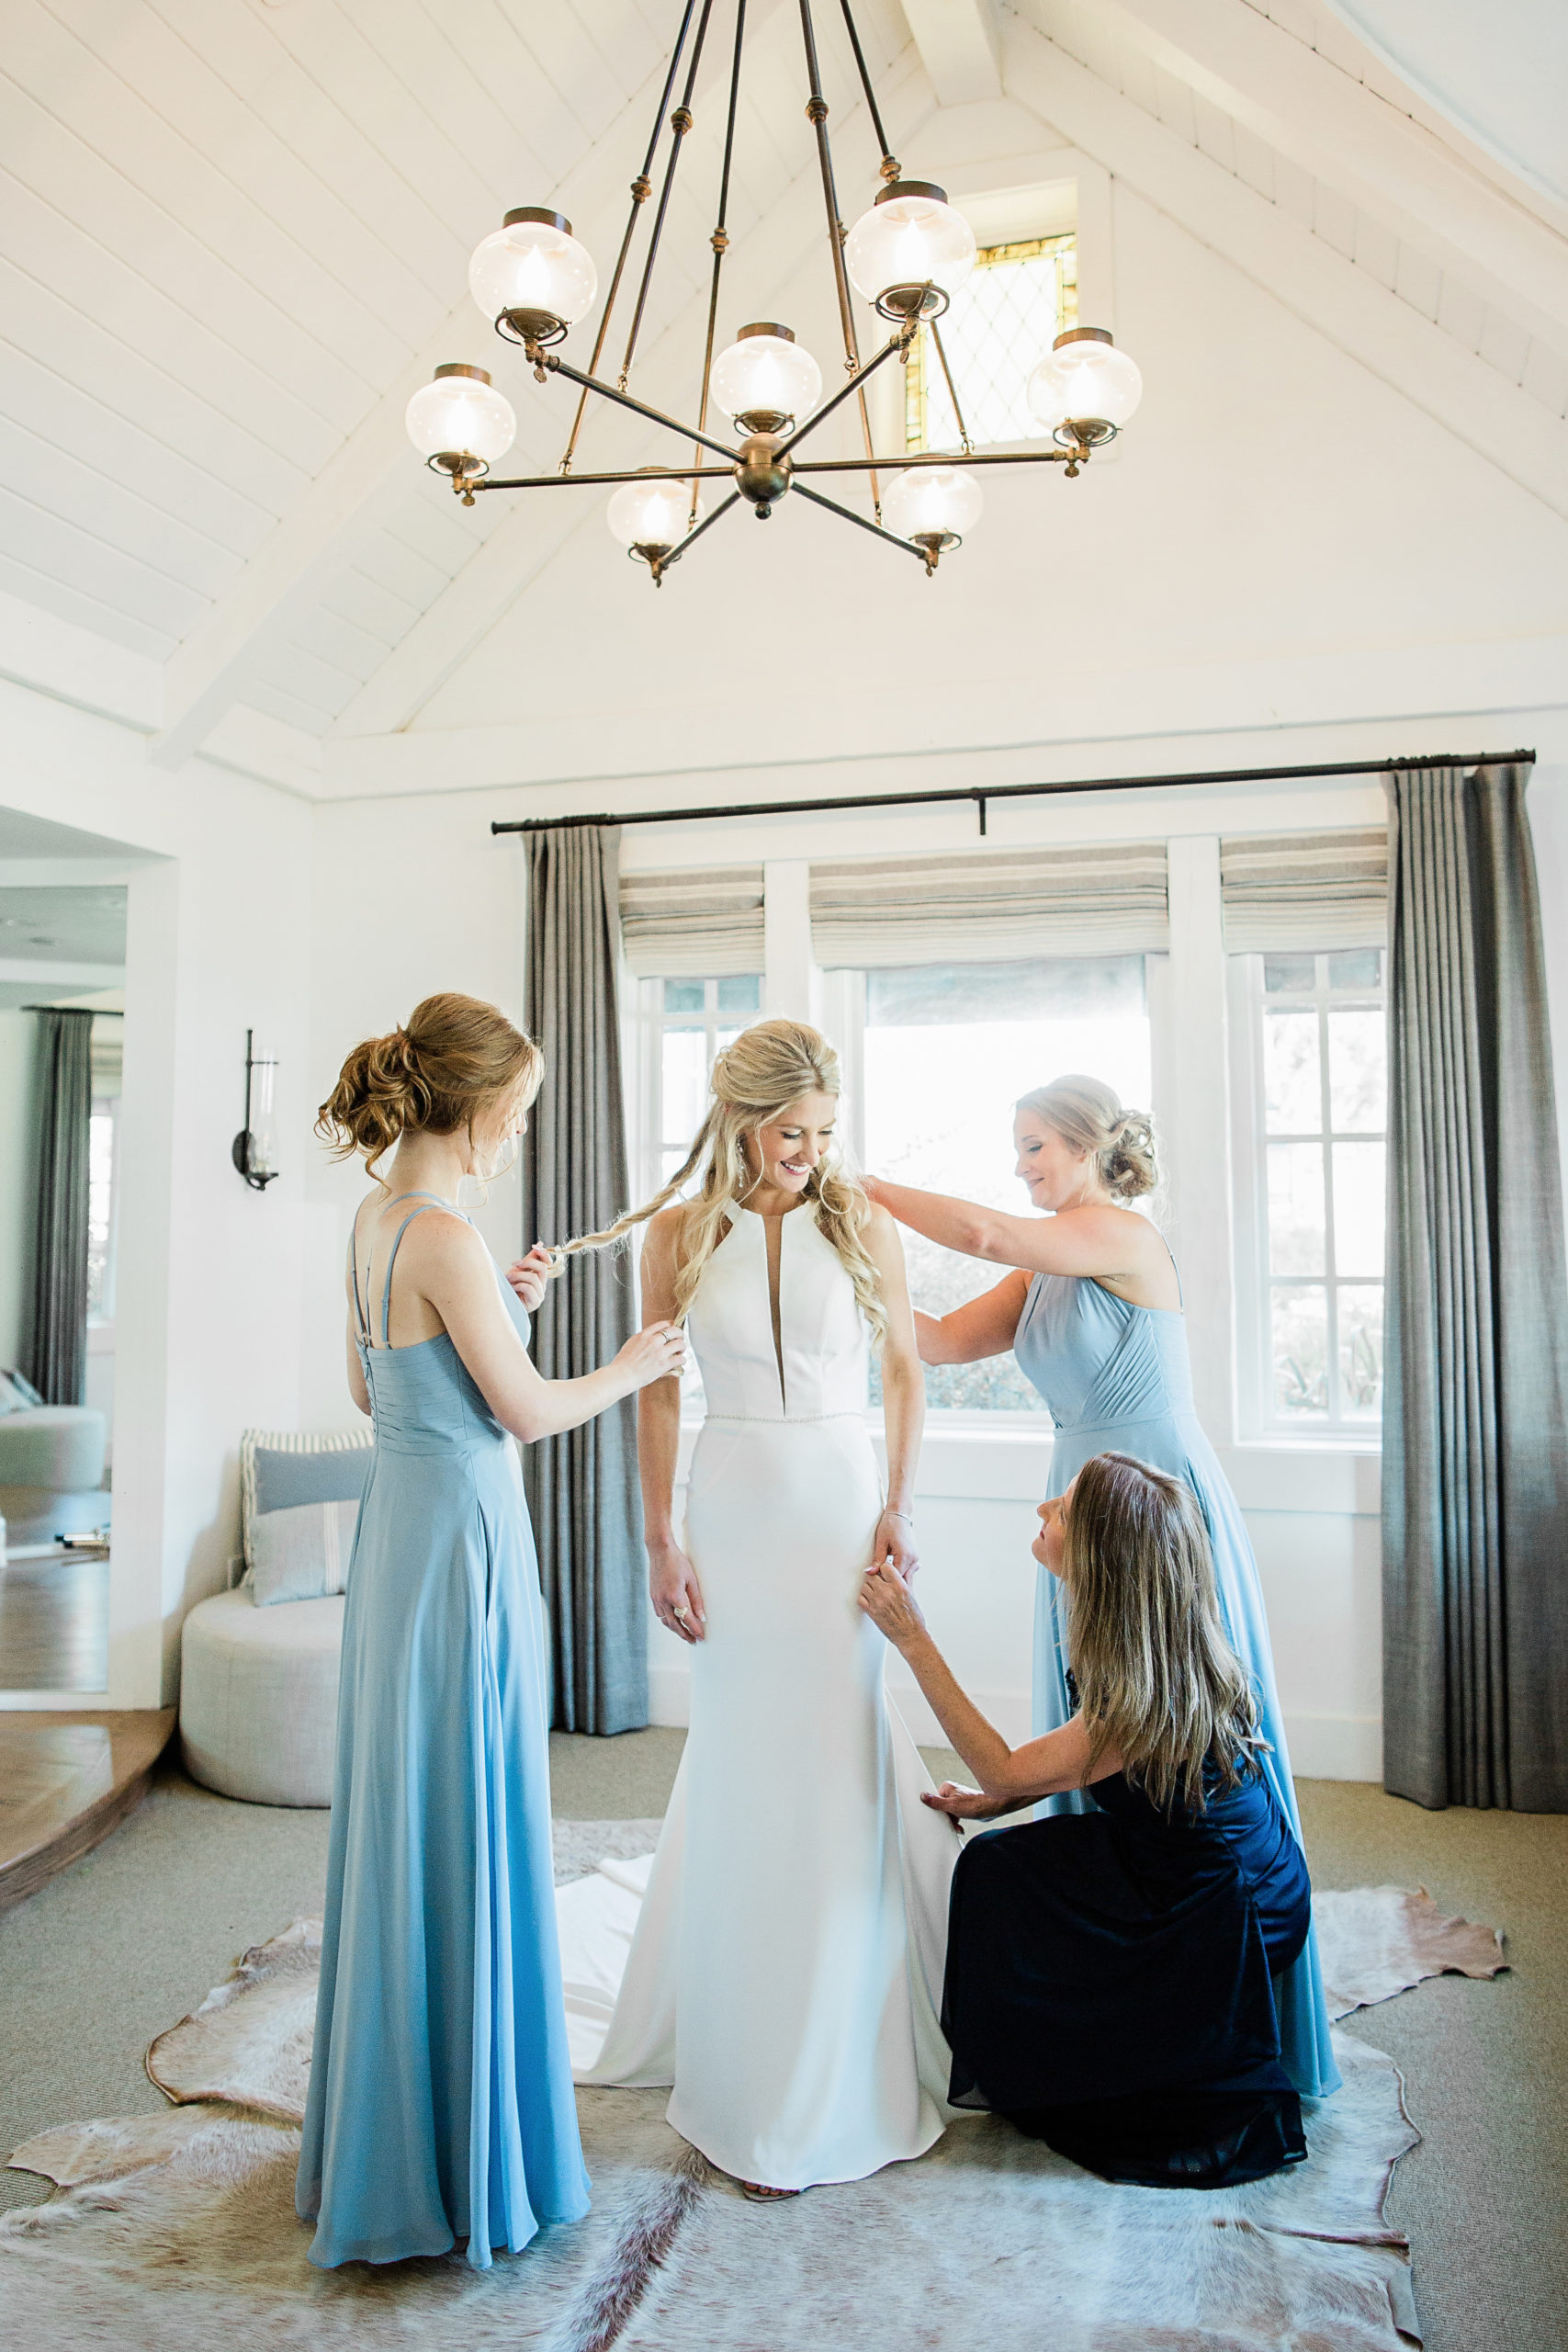 Bride getting her dress put on with the bridesmaids helping her get dressed